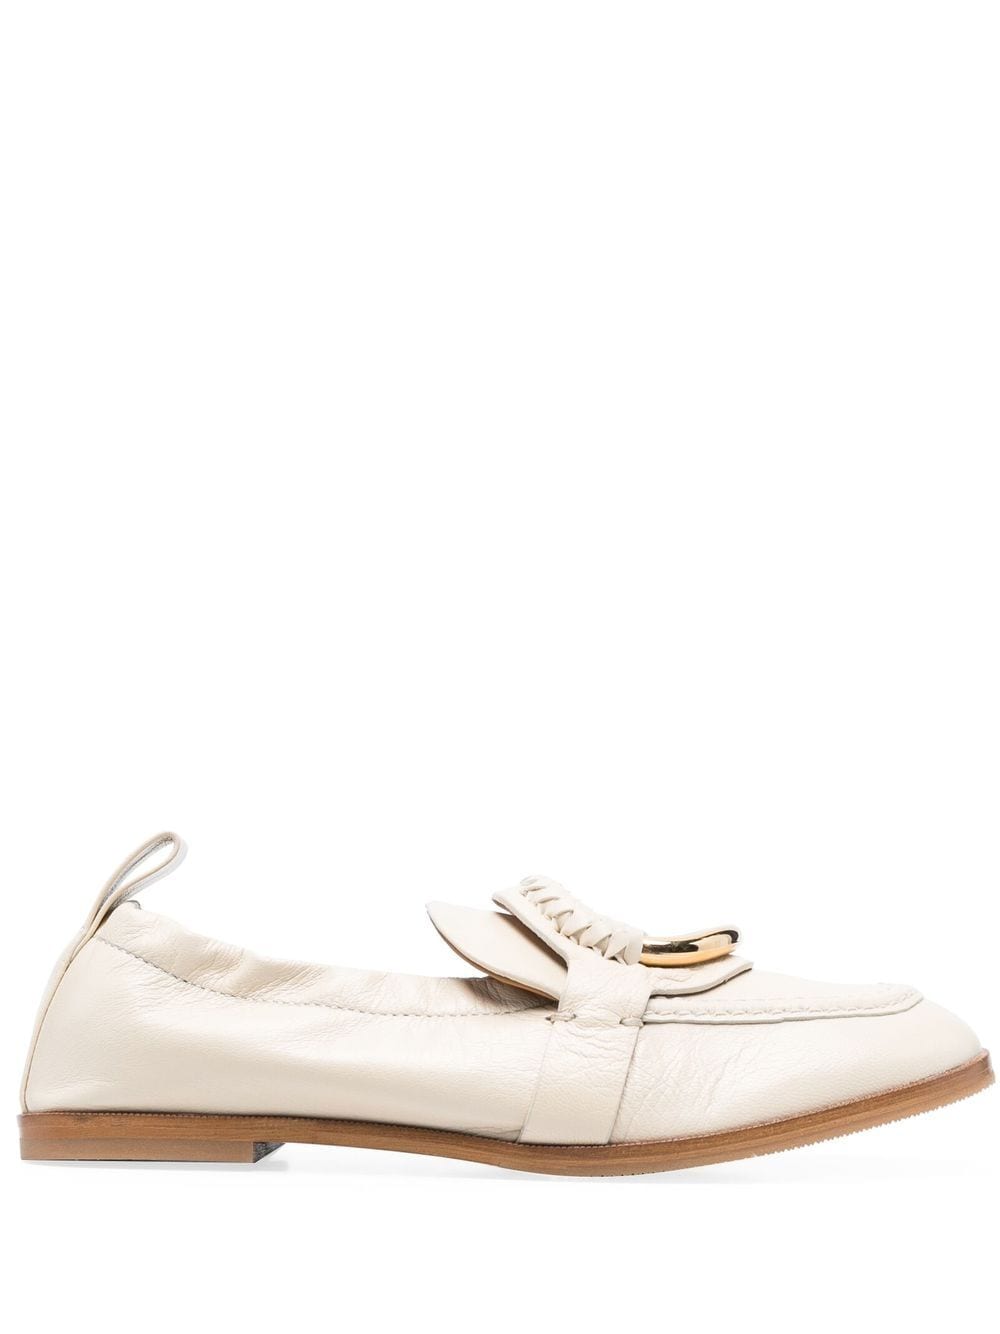 See by Chloé Hana ring-detail leather loafers - Neutrals von See by Chloé